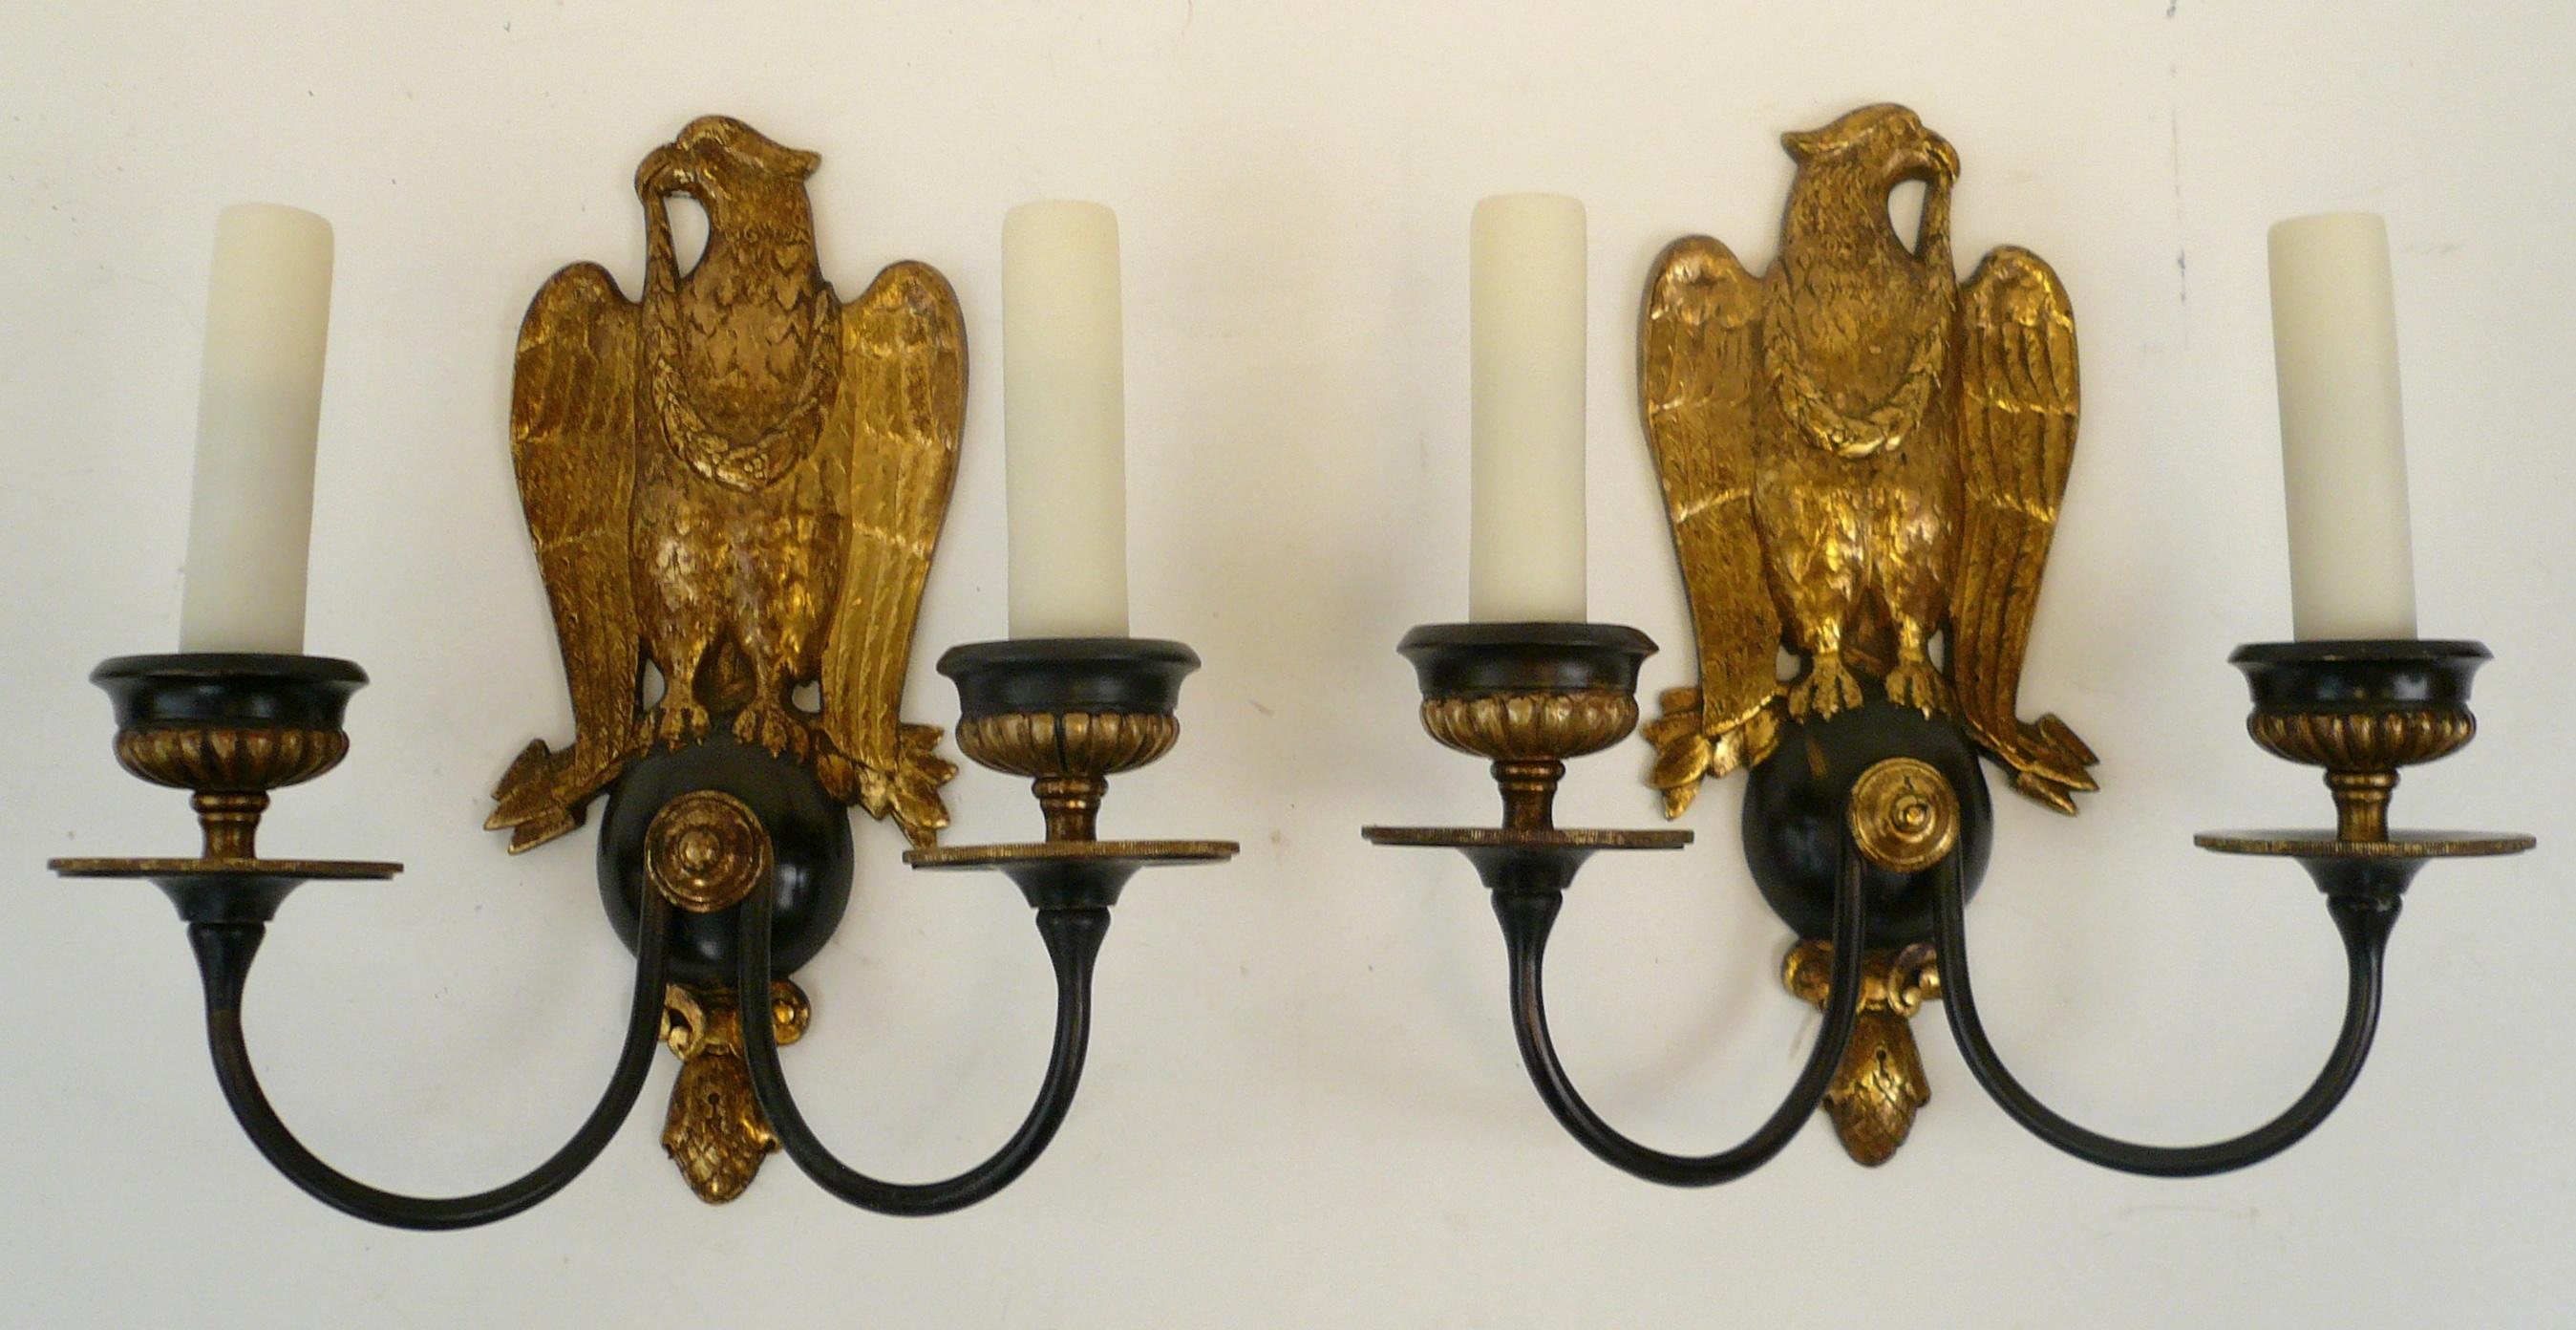 Federal Pair of Regency Style Bronze Eagle Sconces Attributed to E, F, Caldwell